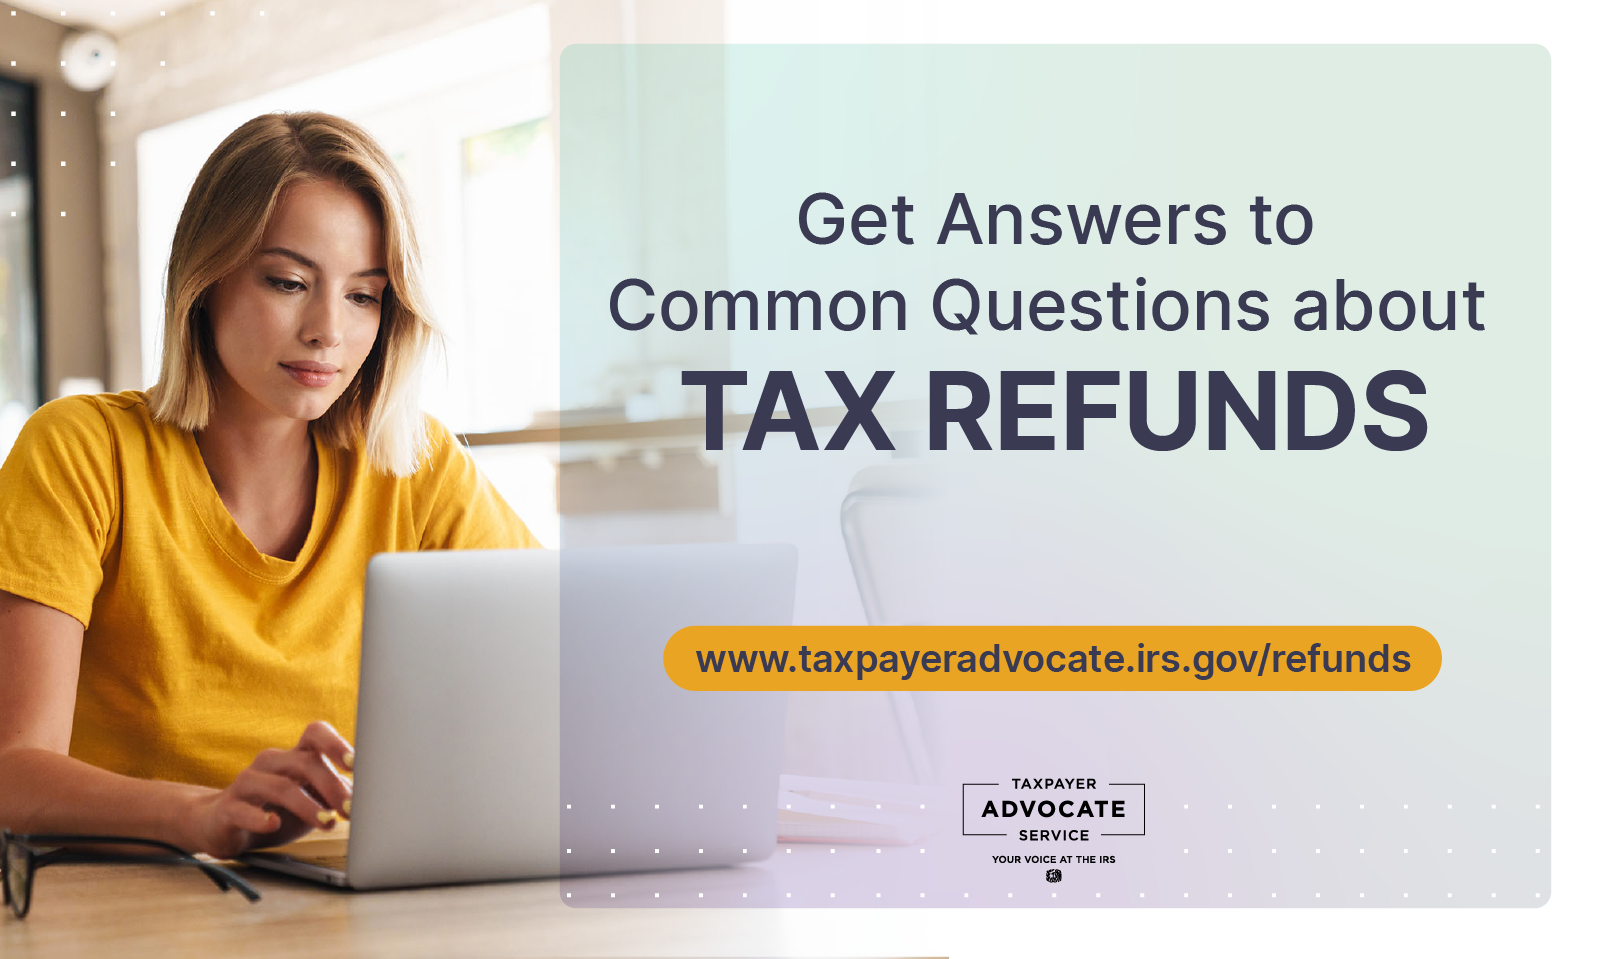 A lady sitting at a desk looking at a laptop. Get answers to common questions about tax refunds. Find answers here.